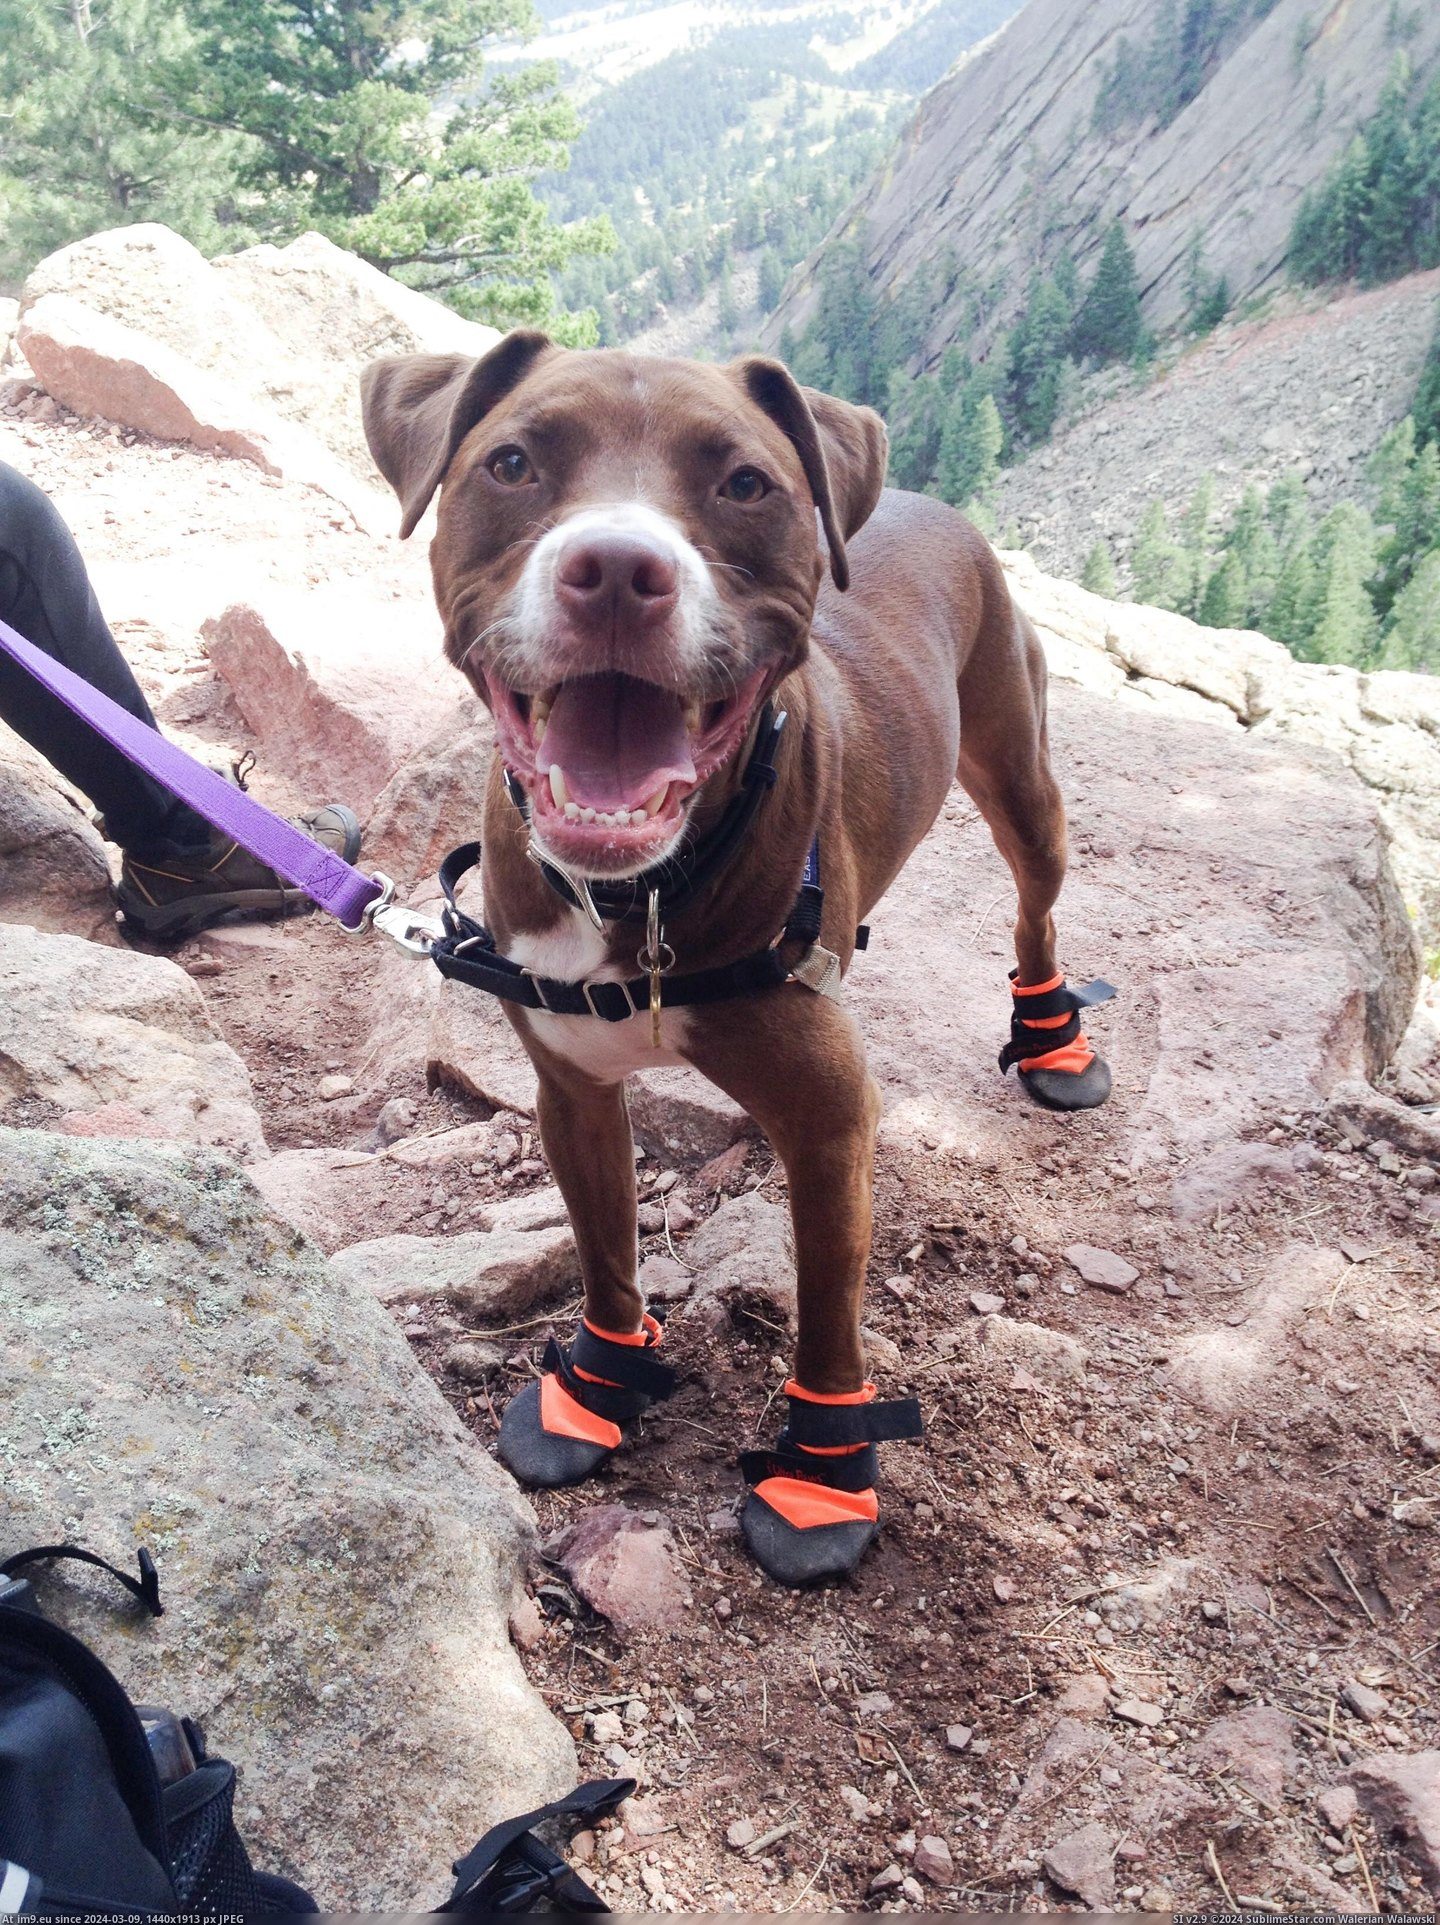 #Dog #Popular #Wore #Boots #Trail [Aww] He wore his new boots today and was the most popular dog on the trail! Pic. (Изображение из альбом My r/AWW favs))